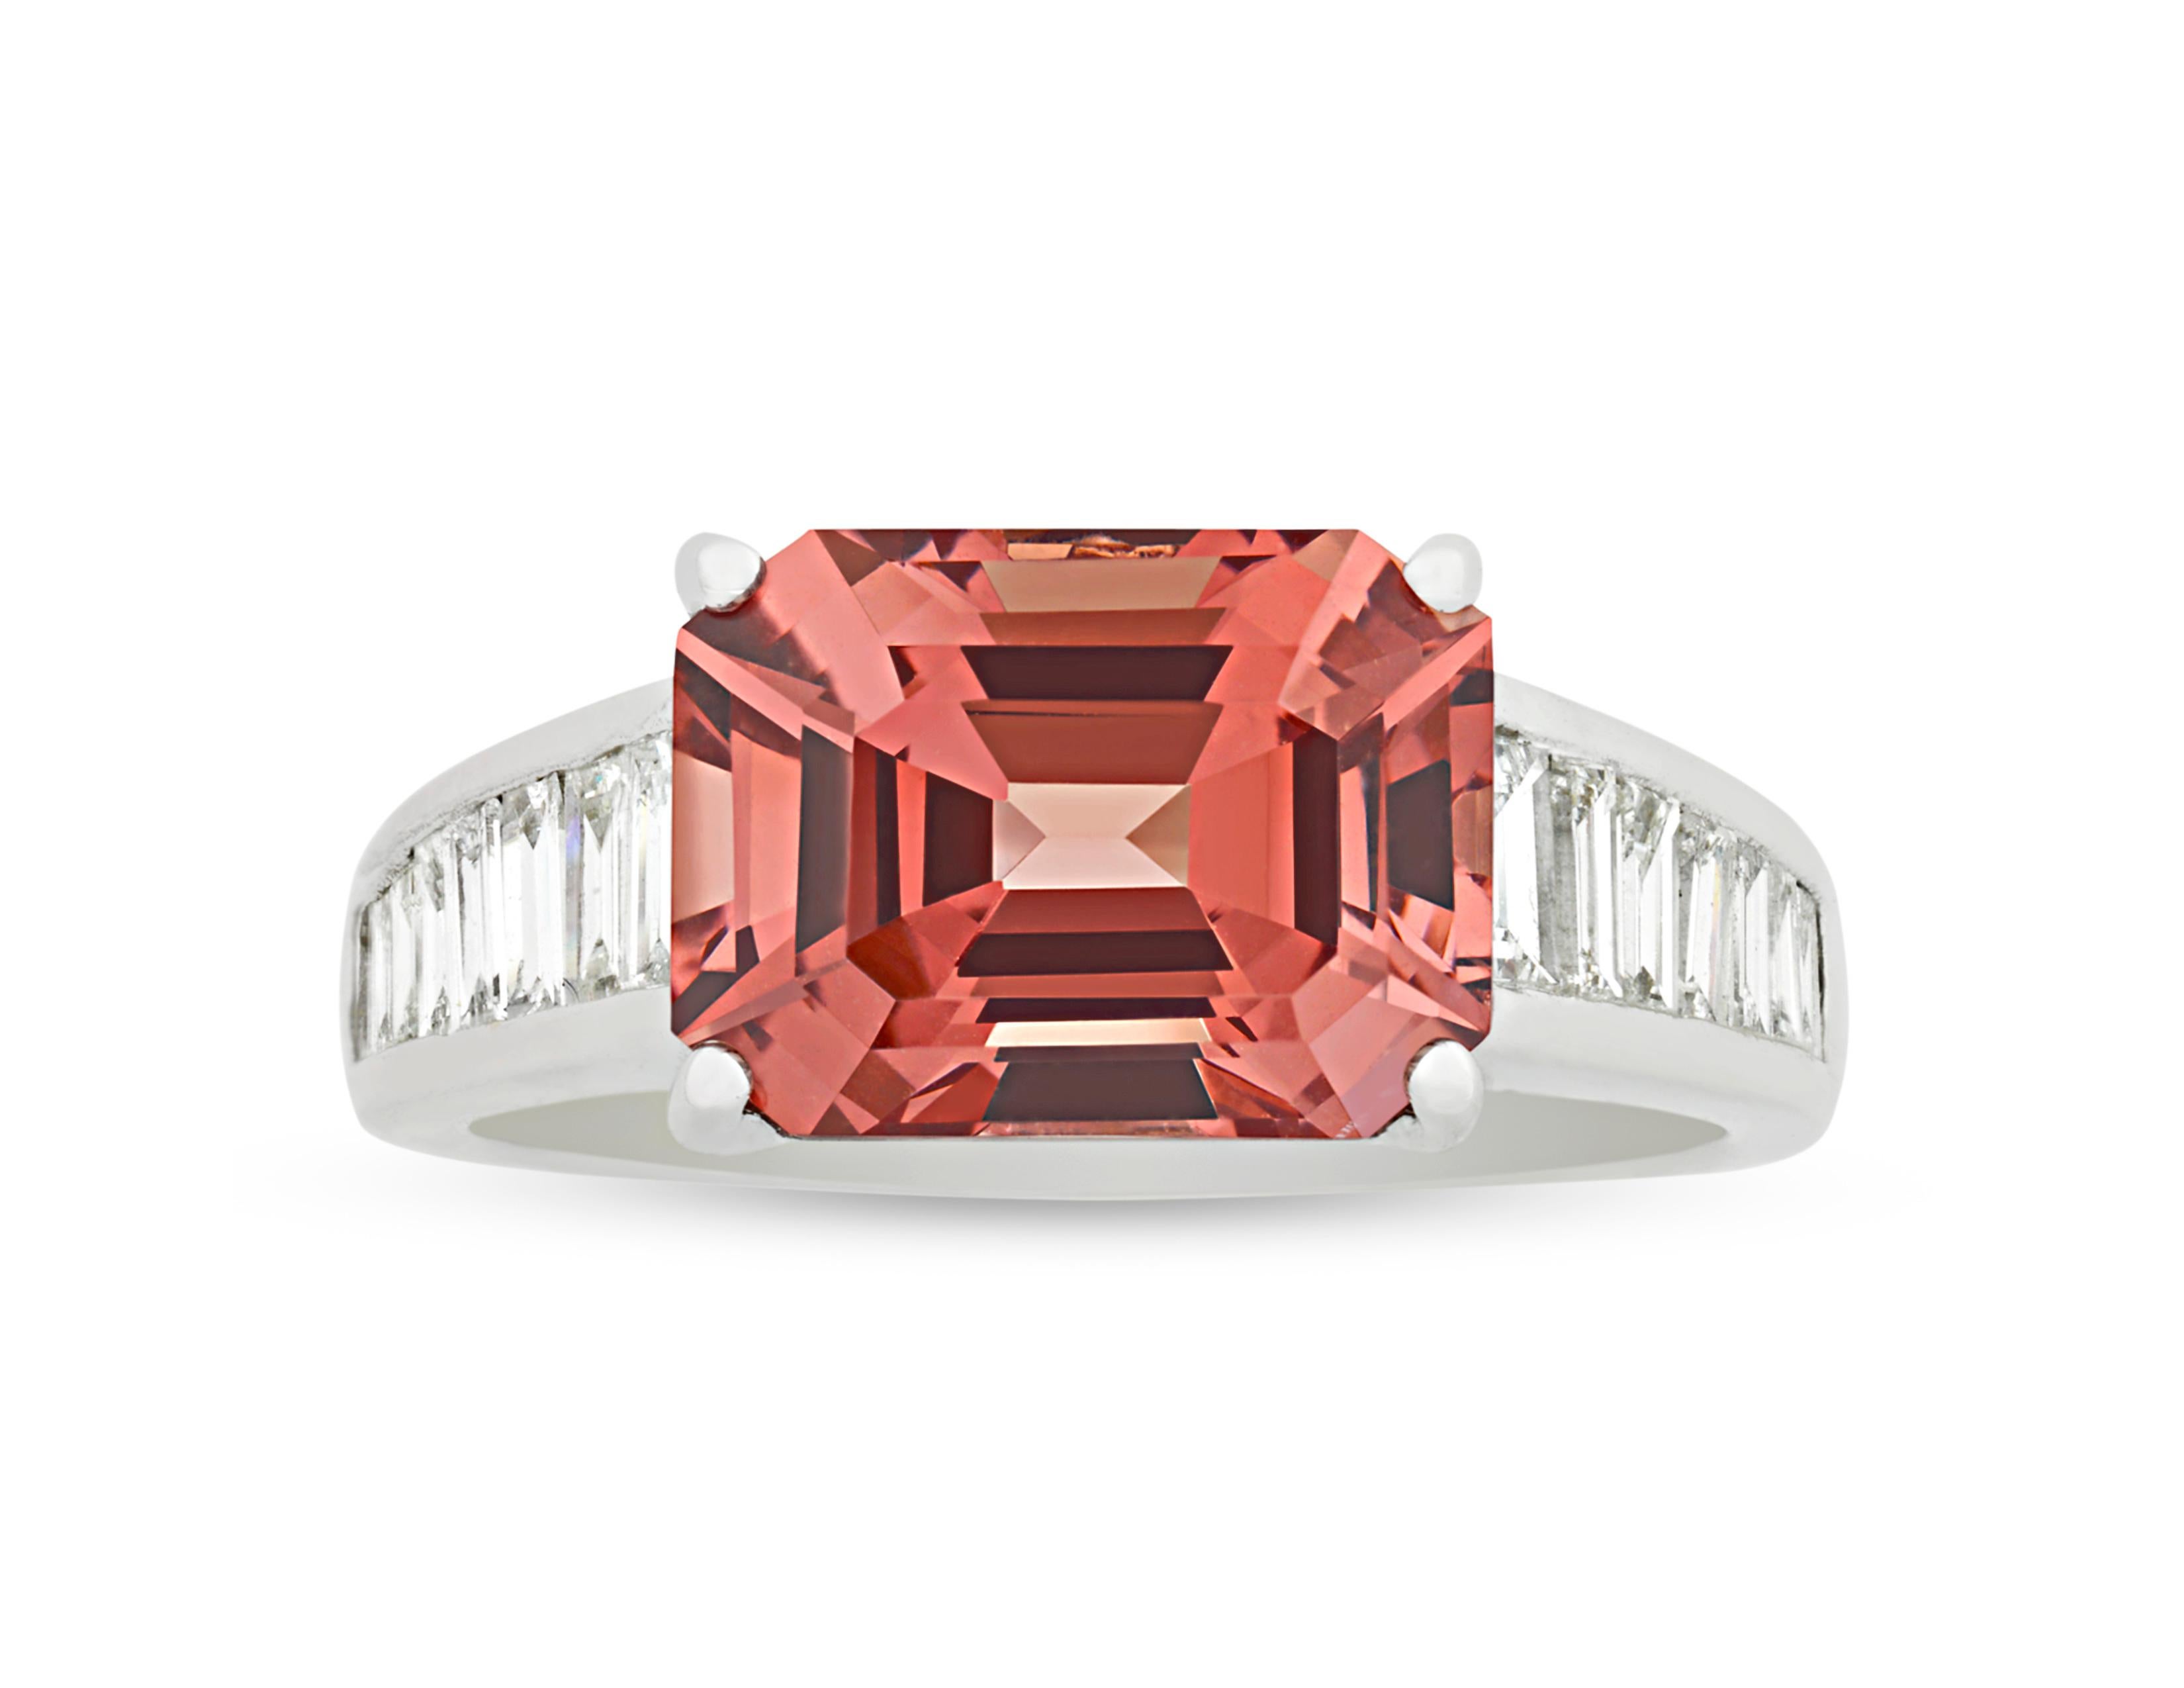 A stunning emerald-cut spinel displays its pinkish-orange hue in this ring. Hailing from the mines in Burma, the 4.62-carat gemstone is flawlessly set in 18K white gold. Diamond baguettes totaling approximately 0.66 carat lend further brilliance to